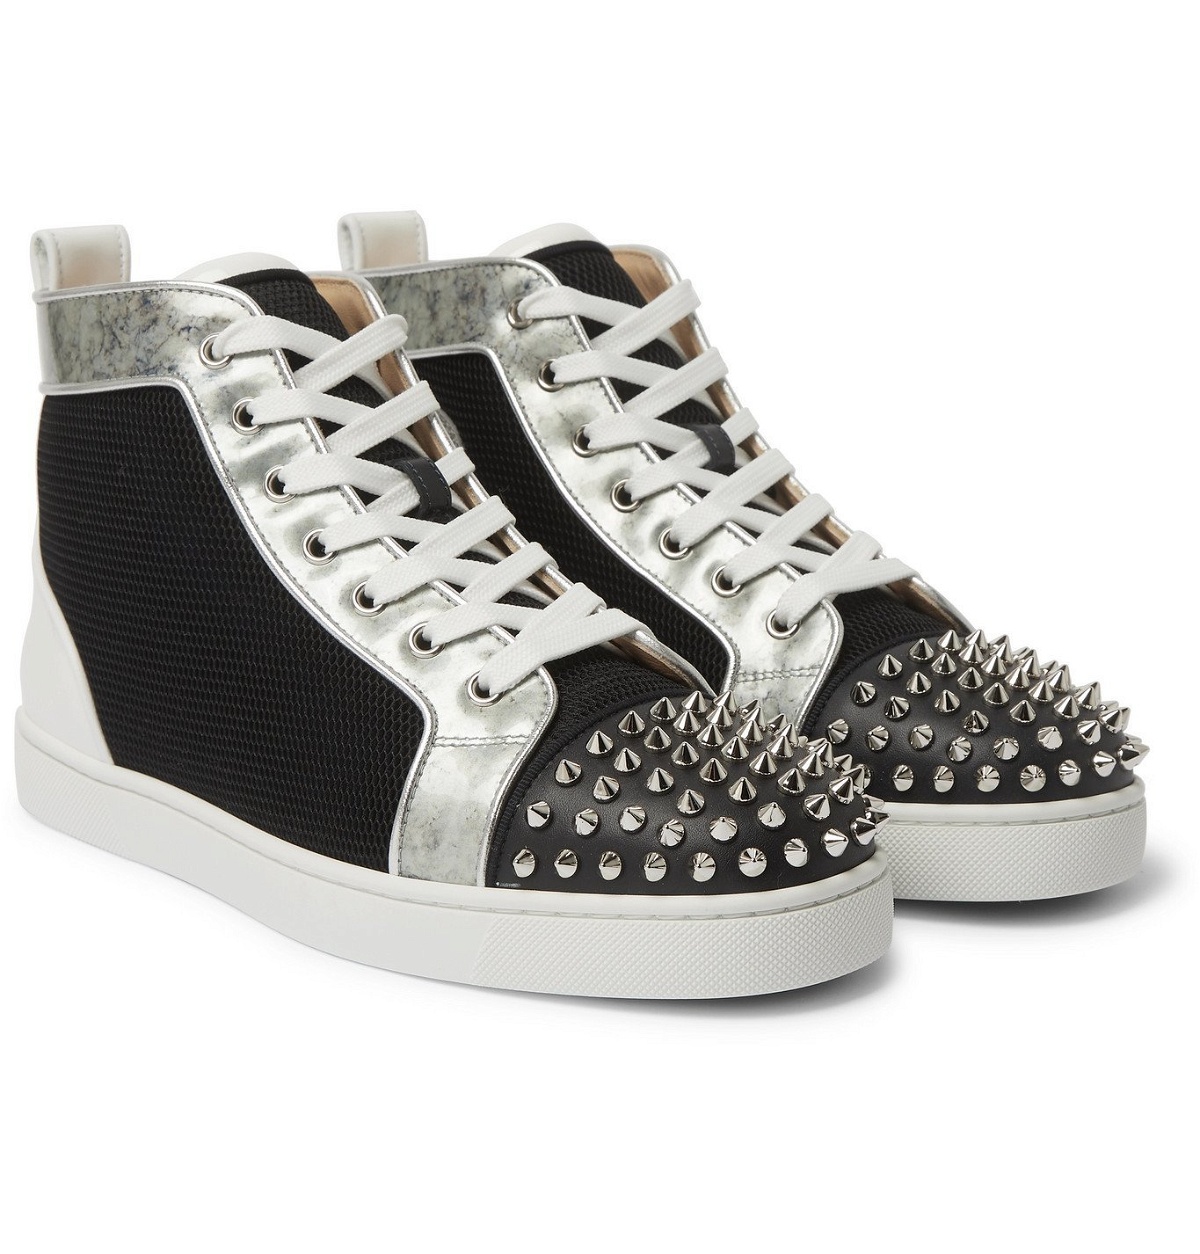 CHRISTIAN LOUBOUTIN - Louis Spiked Leather and Mesh High-Top Sneakers -  Black Christian Louboutin